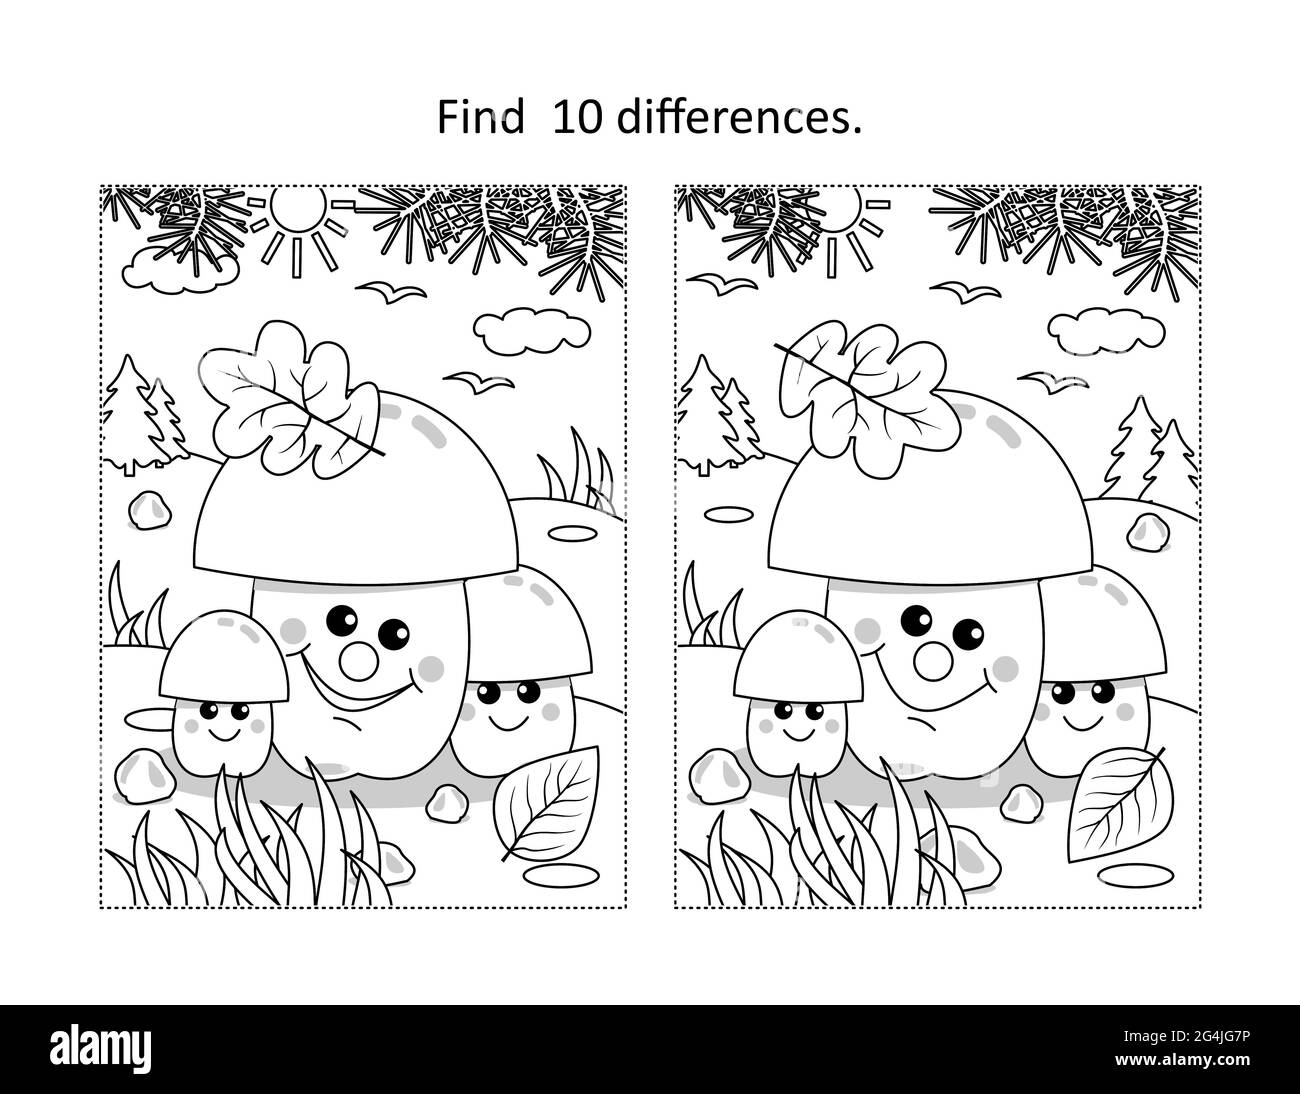 Children colouring in Black and White Stock Photos & Images - Alamy